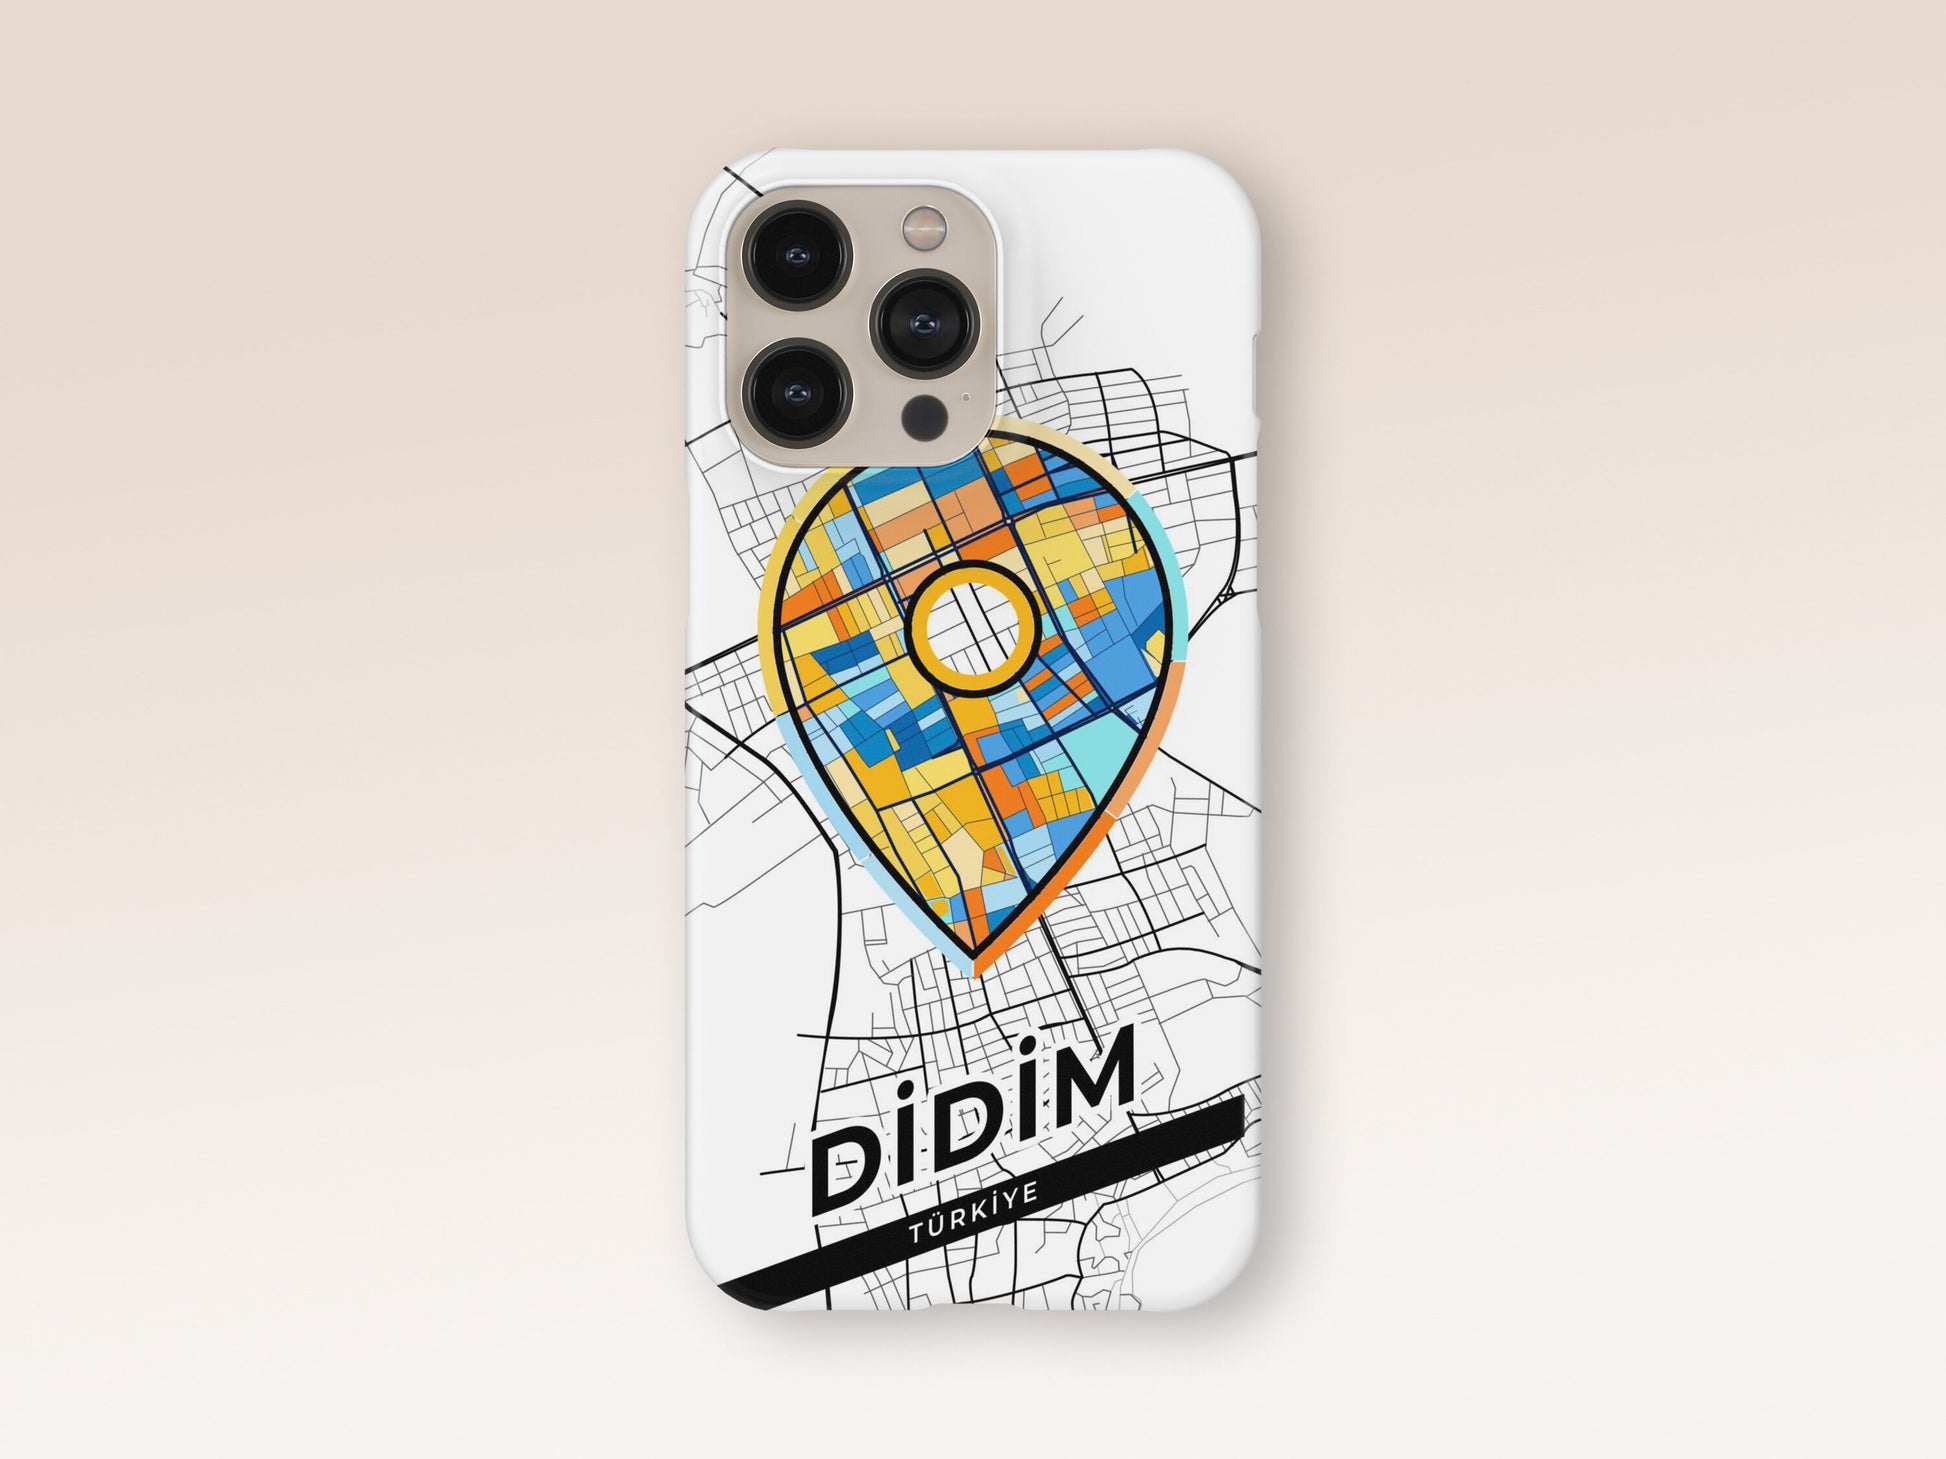 Didim Turkey slim phone case with colorful icon. Birthday, wedding or housewarming gift. Couple match cases. 1